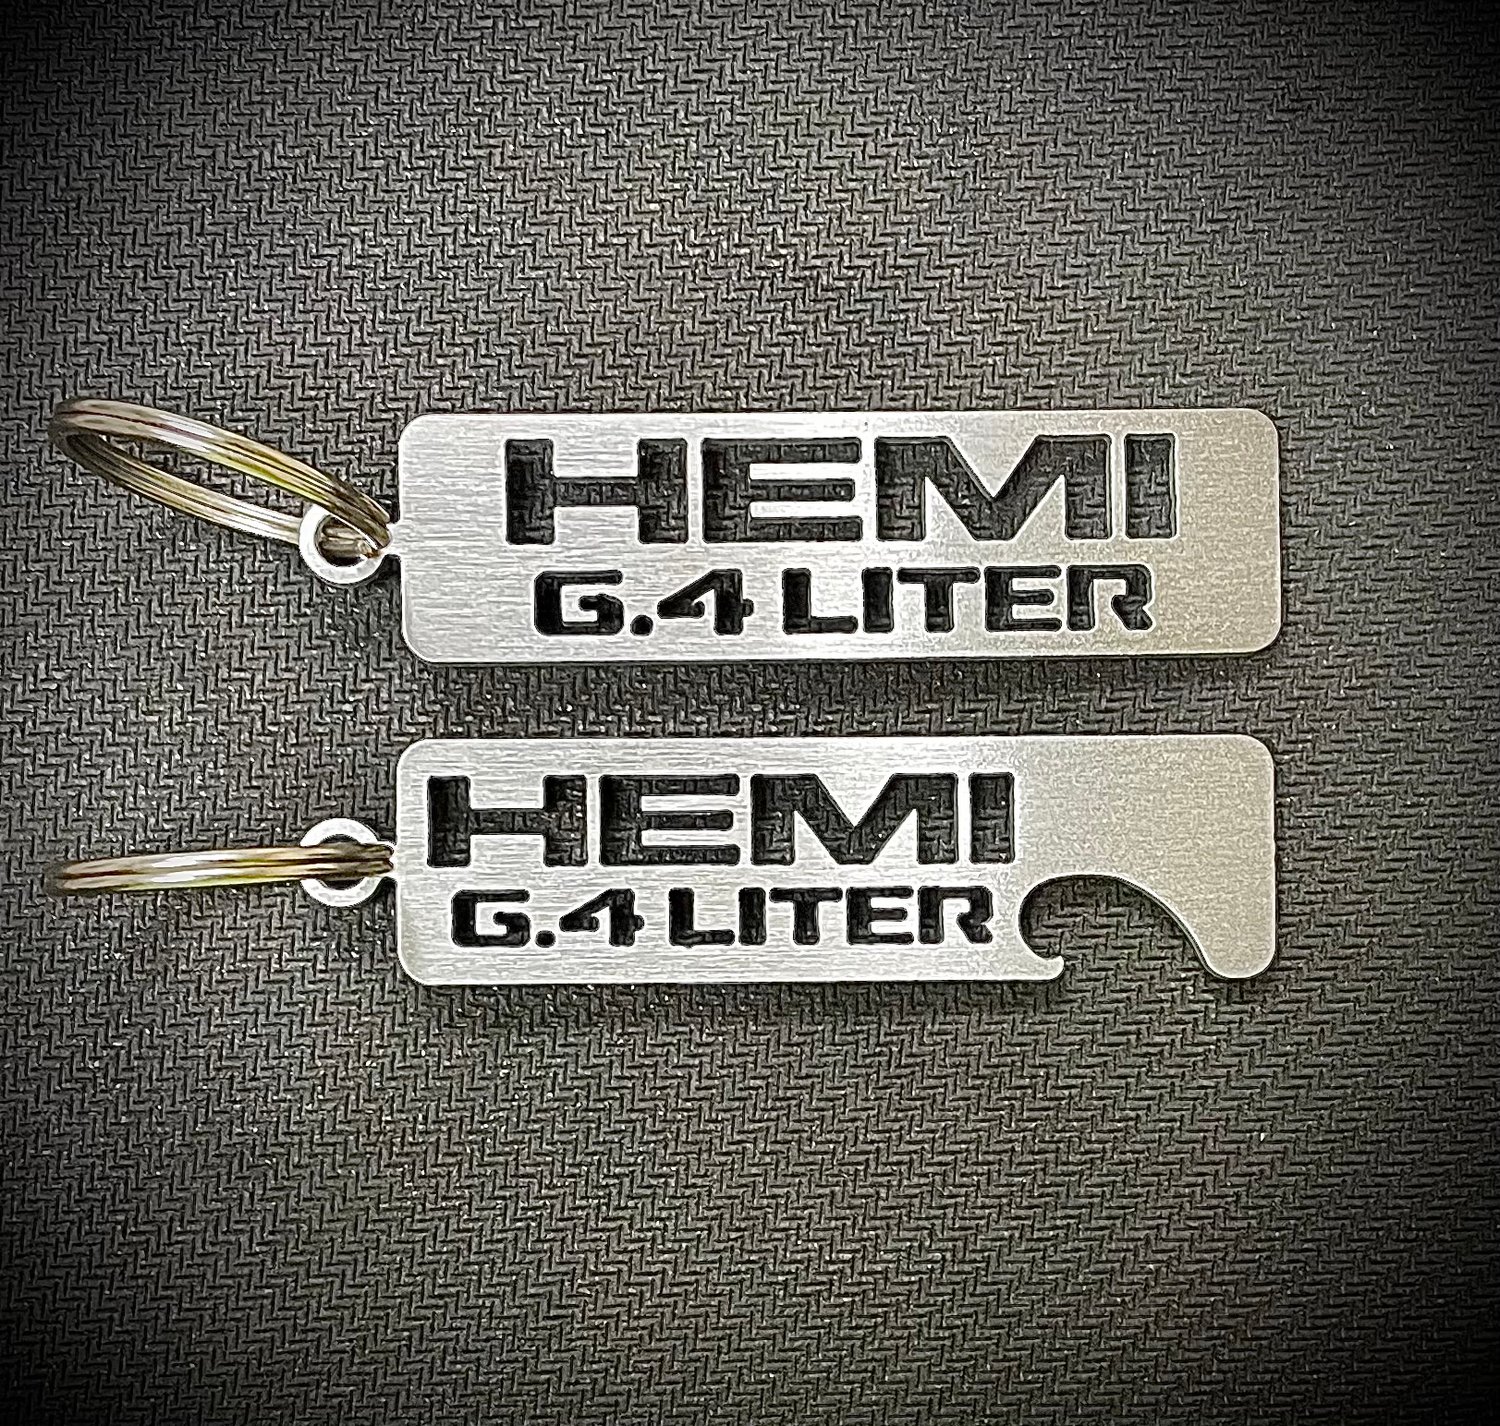 For Hemi 6.4 Liter Enthusiasts 